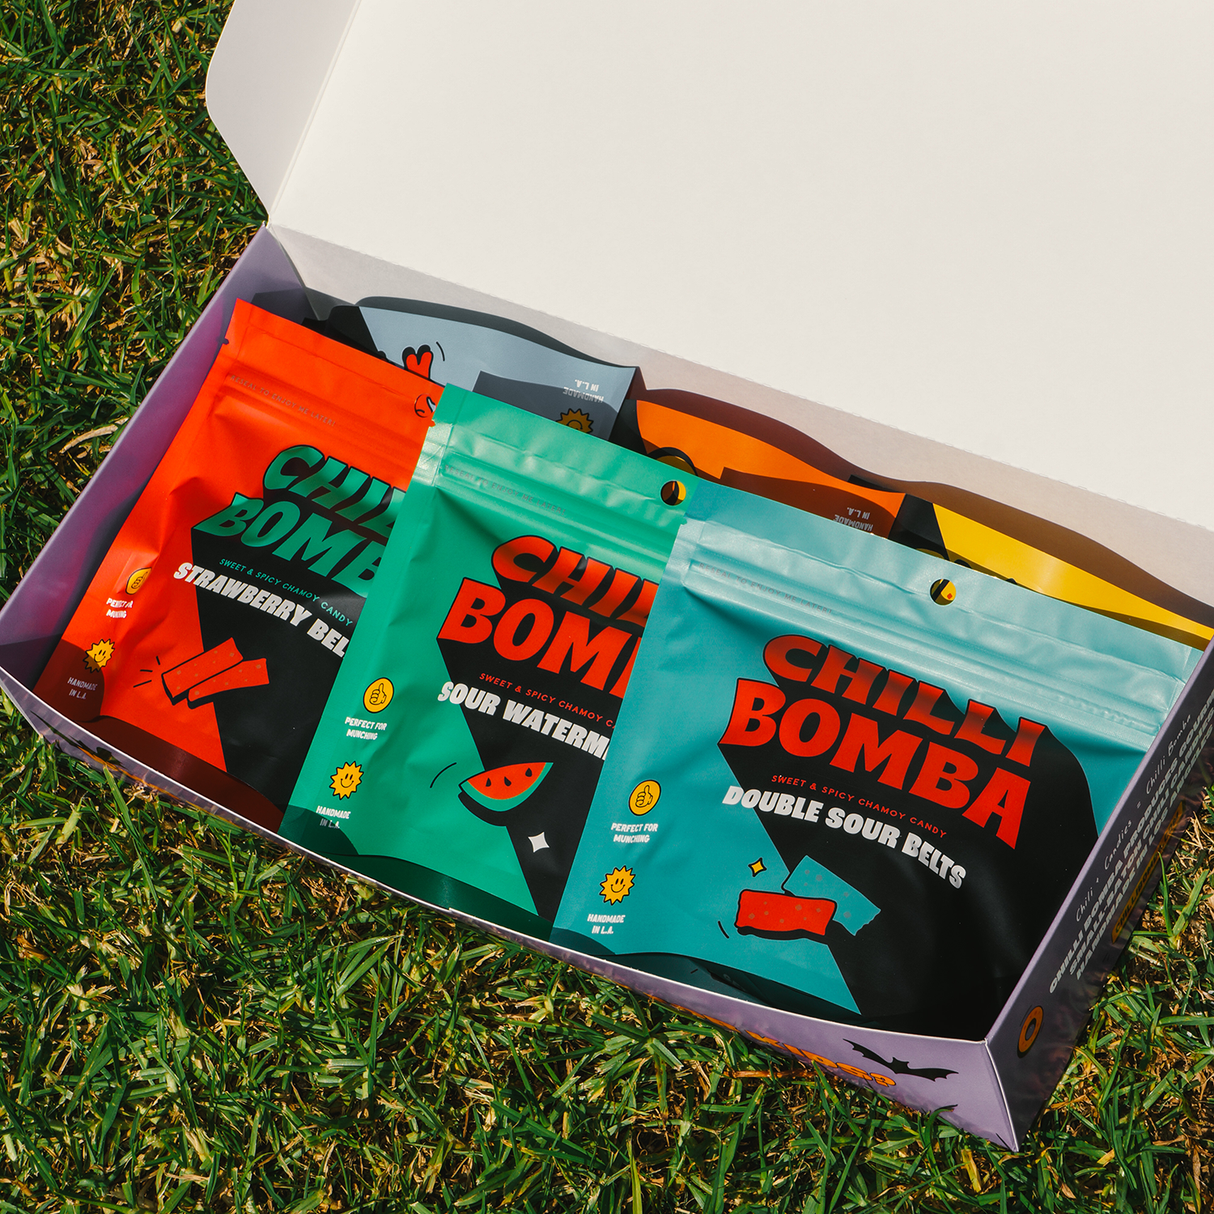 Chilli Bomba's Mystery Box open on grass, showing assorted spicy snacks